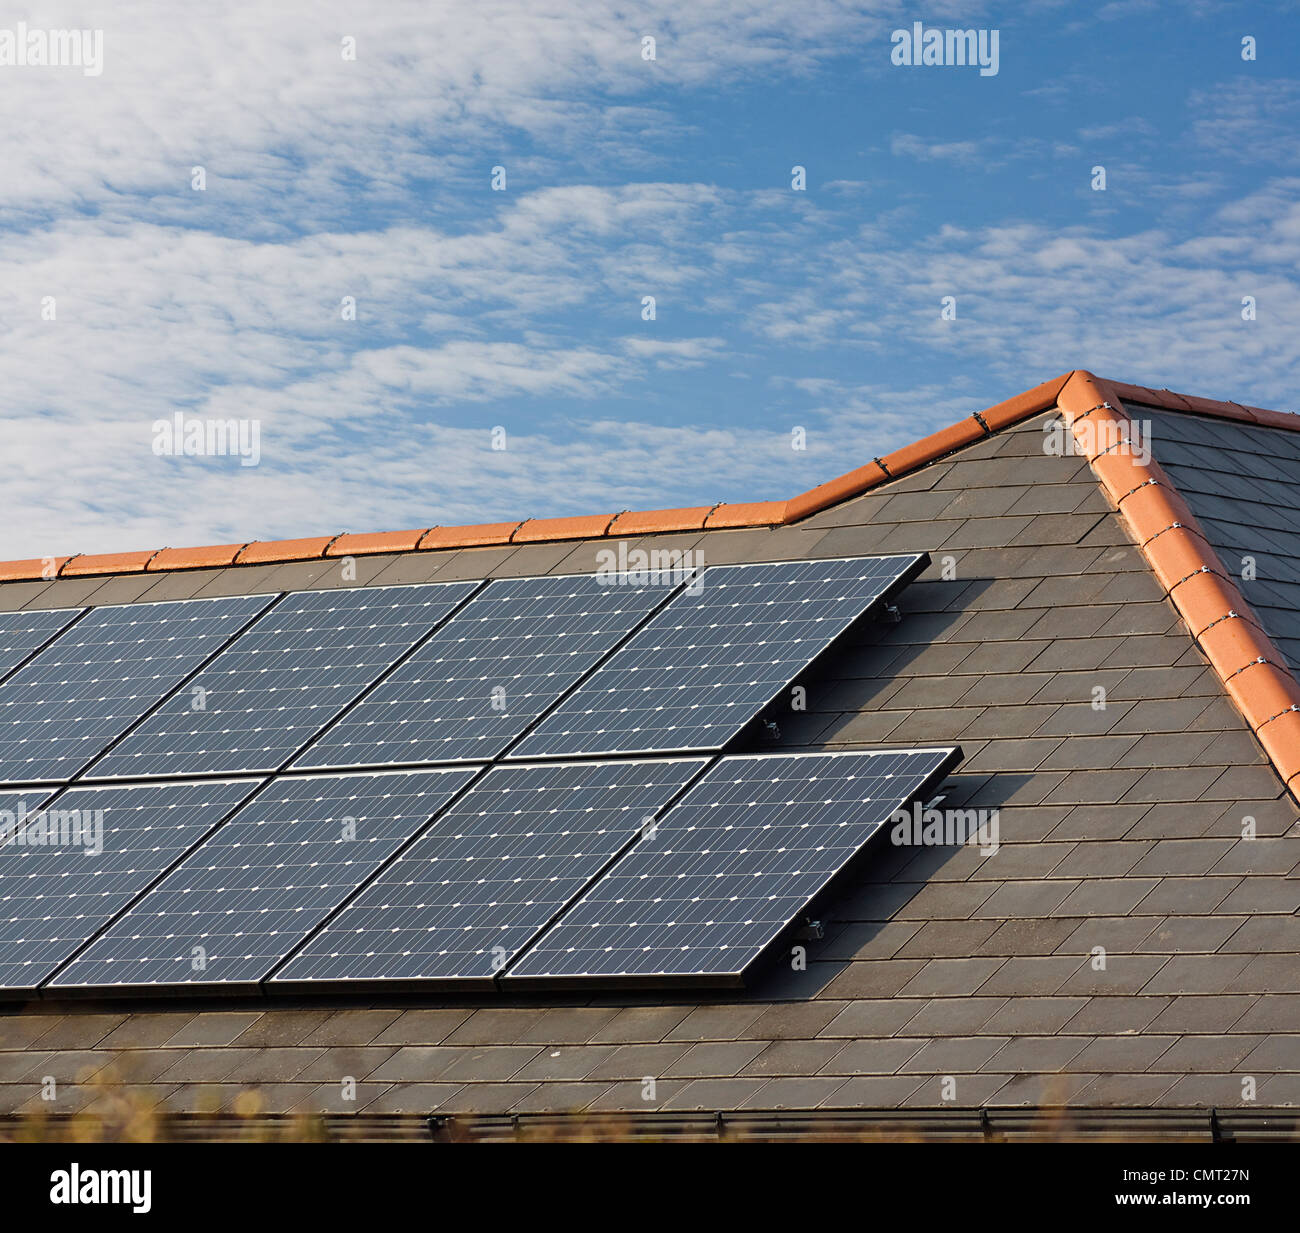 Photovoltaic Solar panels Mounted on a slate roof of residential or private home Stock Photo